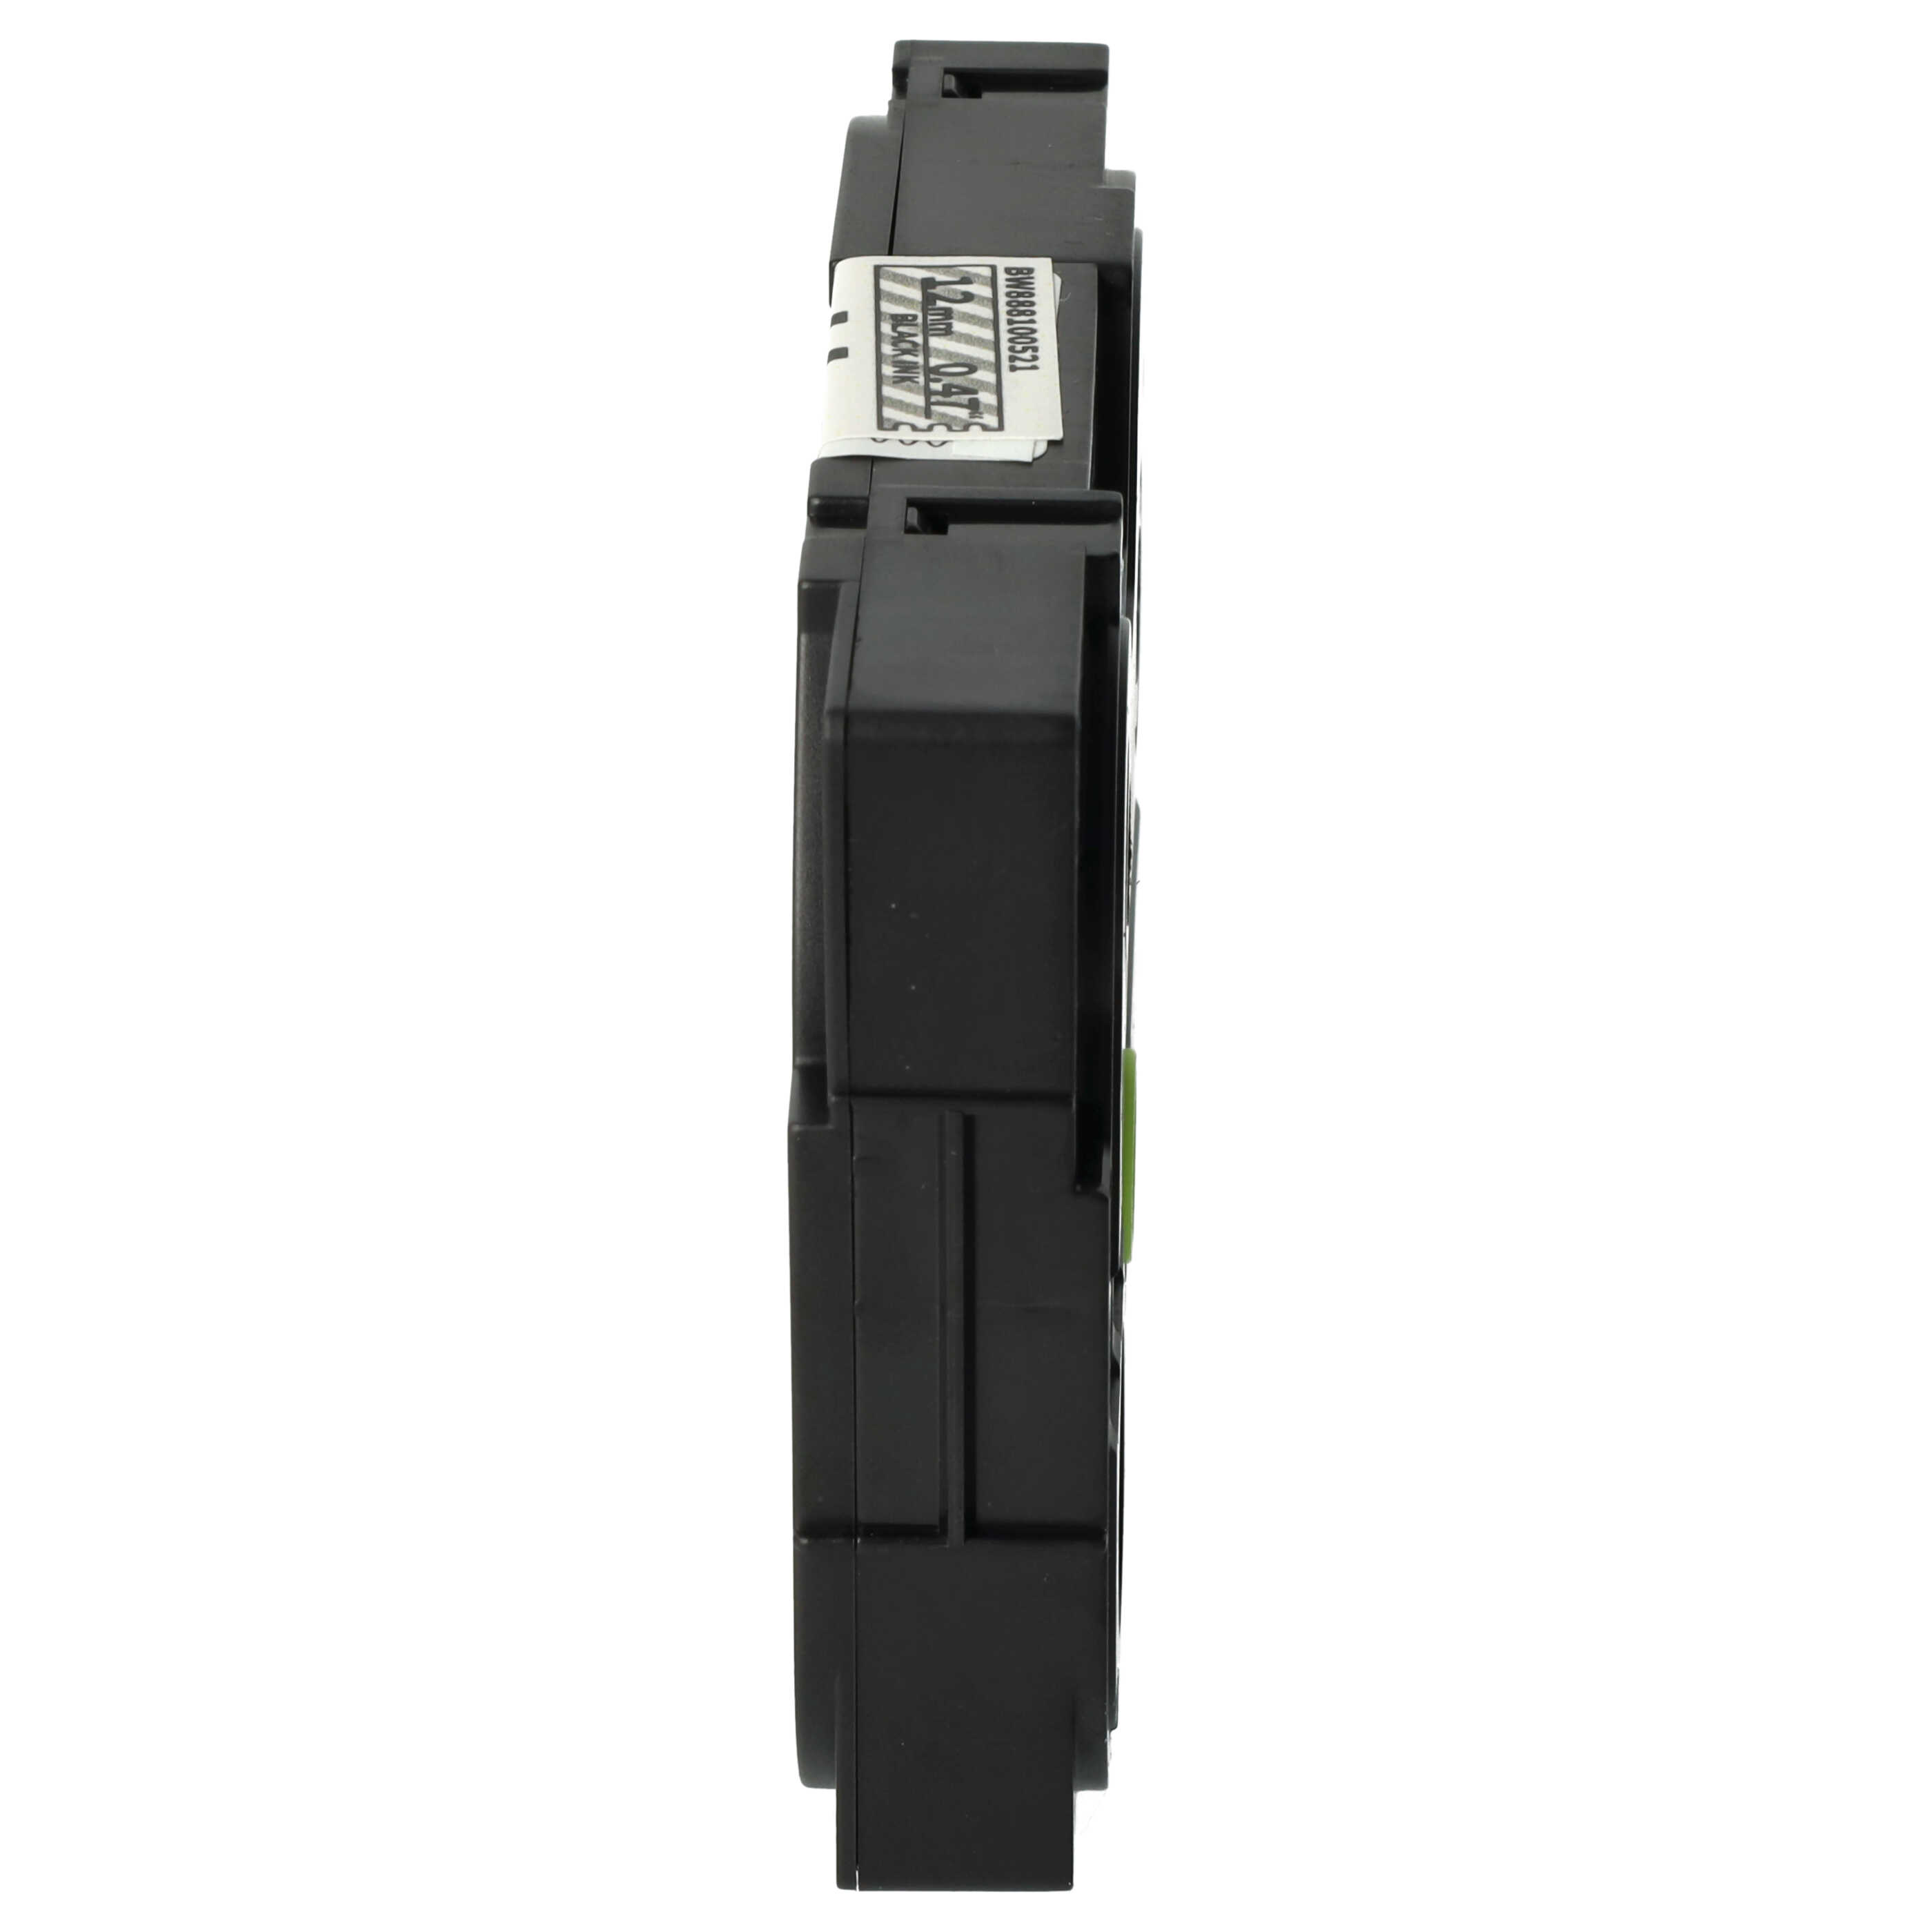 Label Tape as Replacement for Brother AHe-S131, HGE-S131, HGES131 - 12 mm Black to Transparent